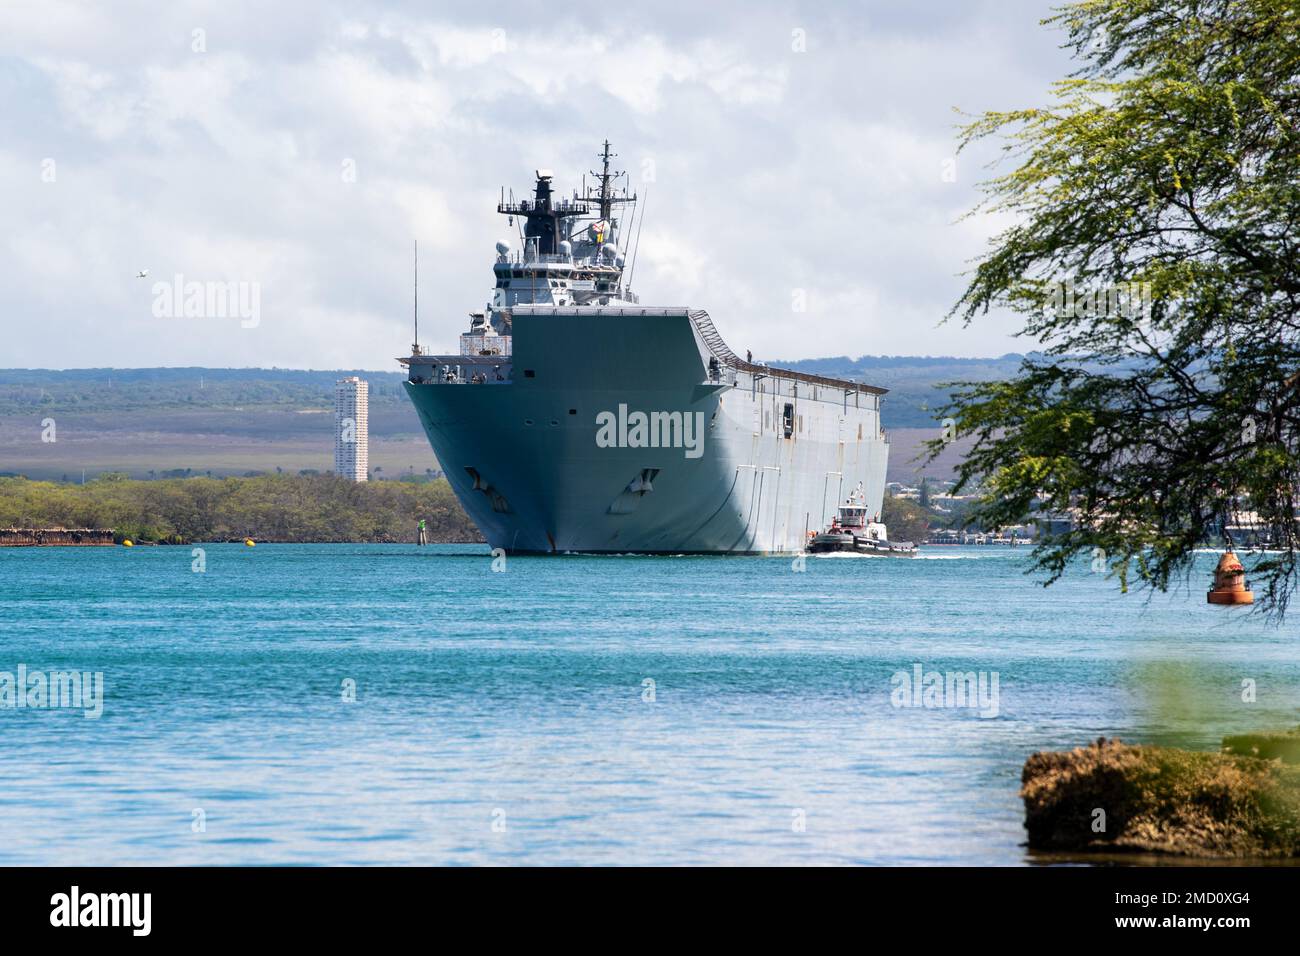 220712-N-RG360-1038  PEARL HARBOR (July 12, 2022) – Royal Australian Navy landing helicopter dock HMAS Canberra (L02) departs Pearl Harbor to begin the at-sea phase of Rim of the Pacific (RIMPAC) 2022, July 12. Twenty-six nations, 38 ships, four submarines, more than 170 aircraft and 25,000 personnel are participating in RIMPAC from June 29 to Aug. 4 in and around the Hawaiian Islands and Southern California. The world’s largest international maritime exercise, RIMPAC provides a unique training opportunity while fostering and sustaining cooperative relationships among participants critical to Stock Photo